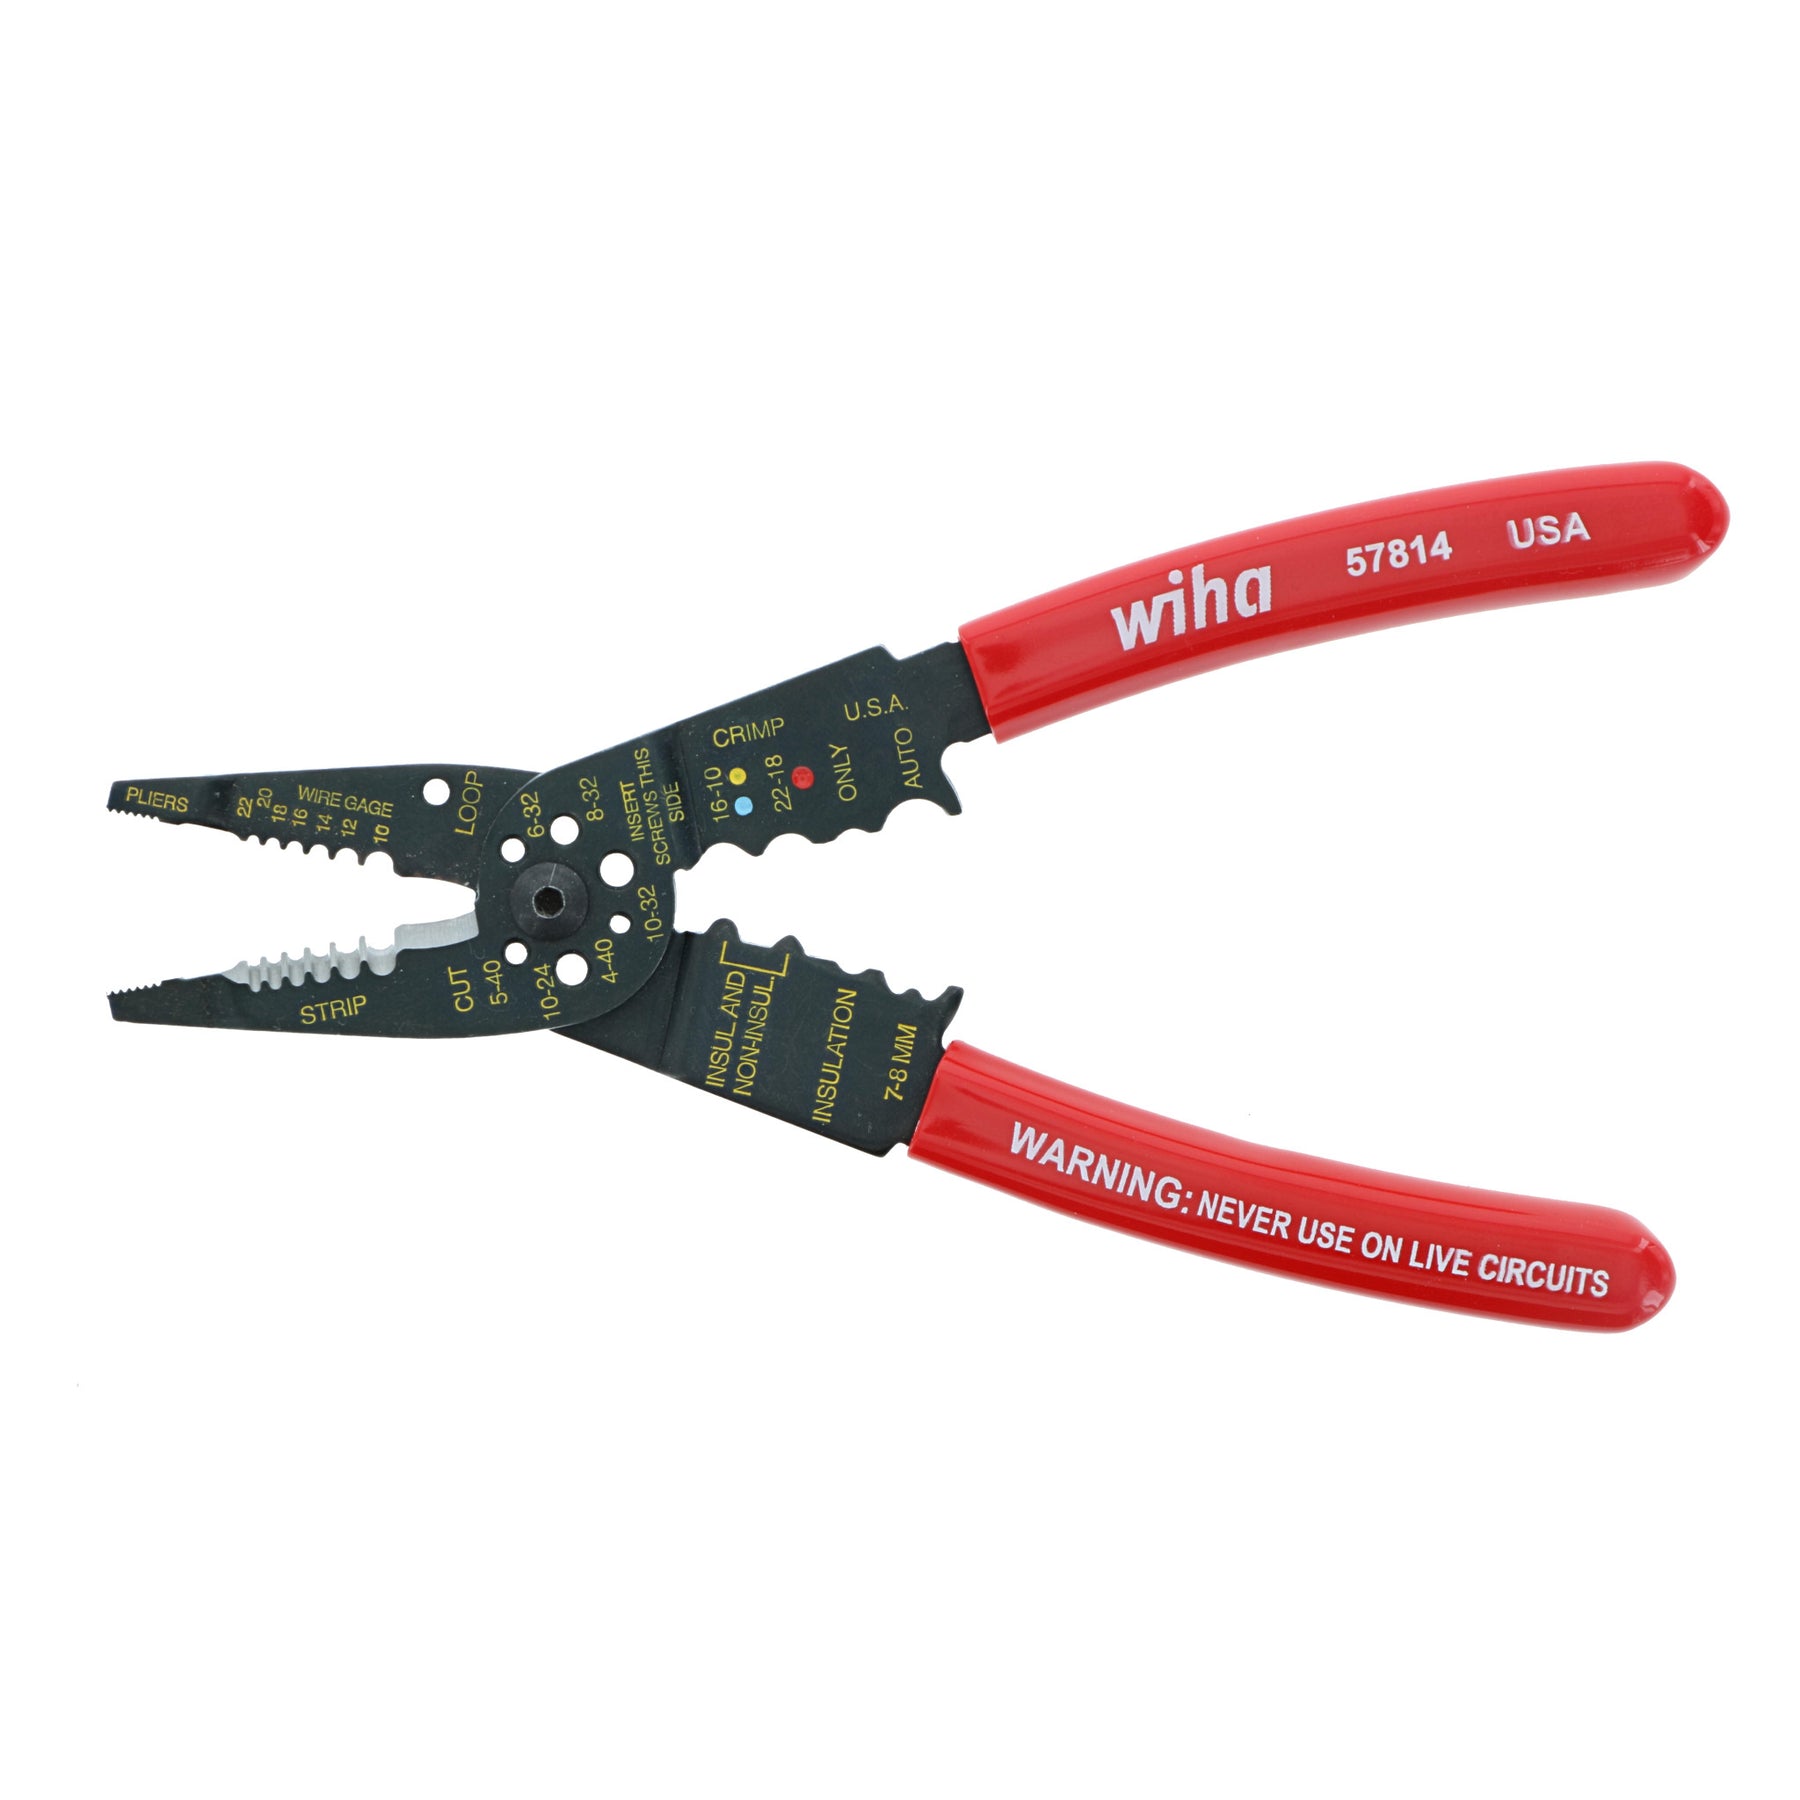 STAHLWERK crimping pliers set of 2 0.75-6 mm² wire stripper cable end ,  14,99 €